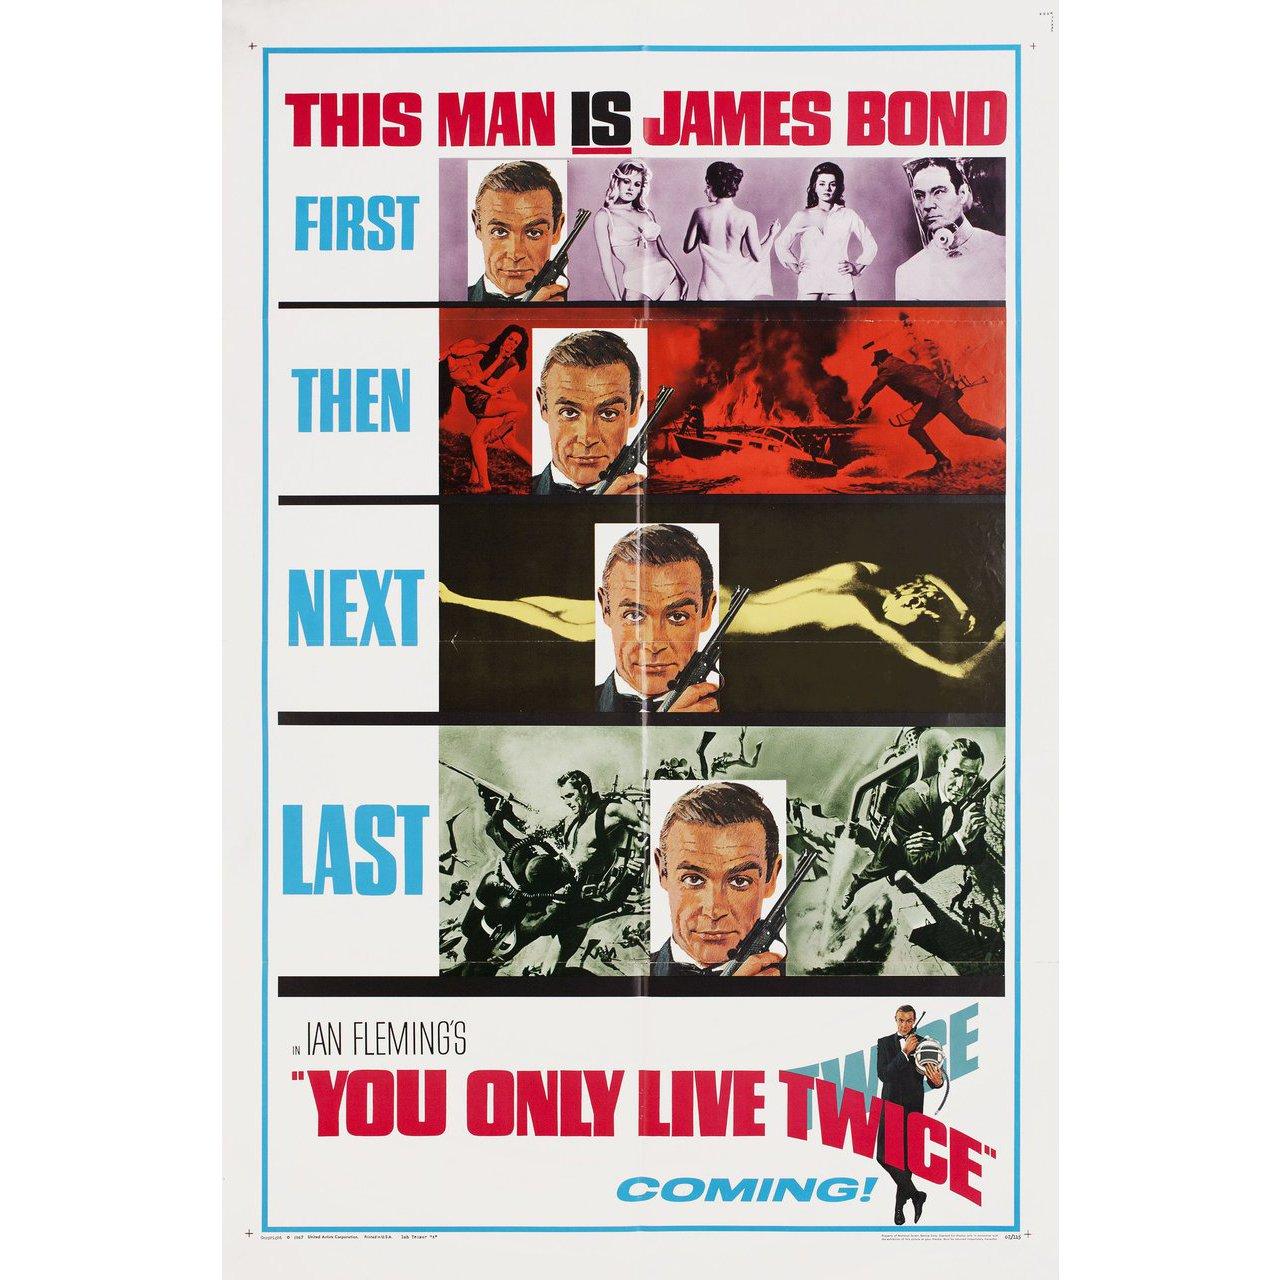 Affiche du film U.S. One Sheet « You Only Live Twice », 1967